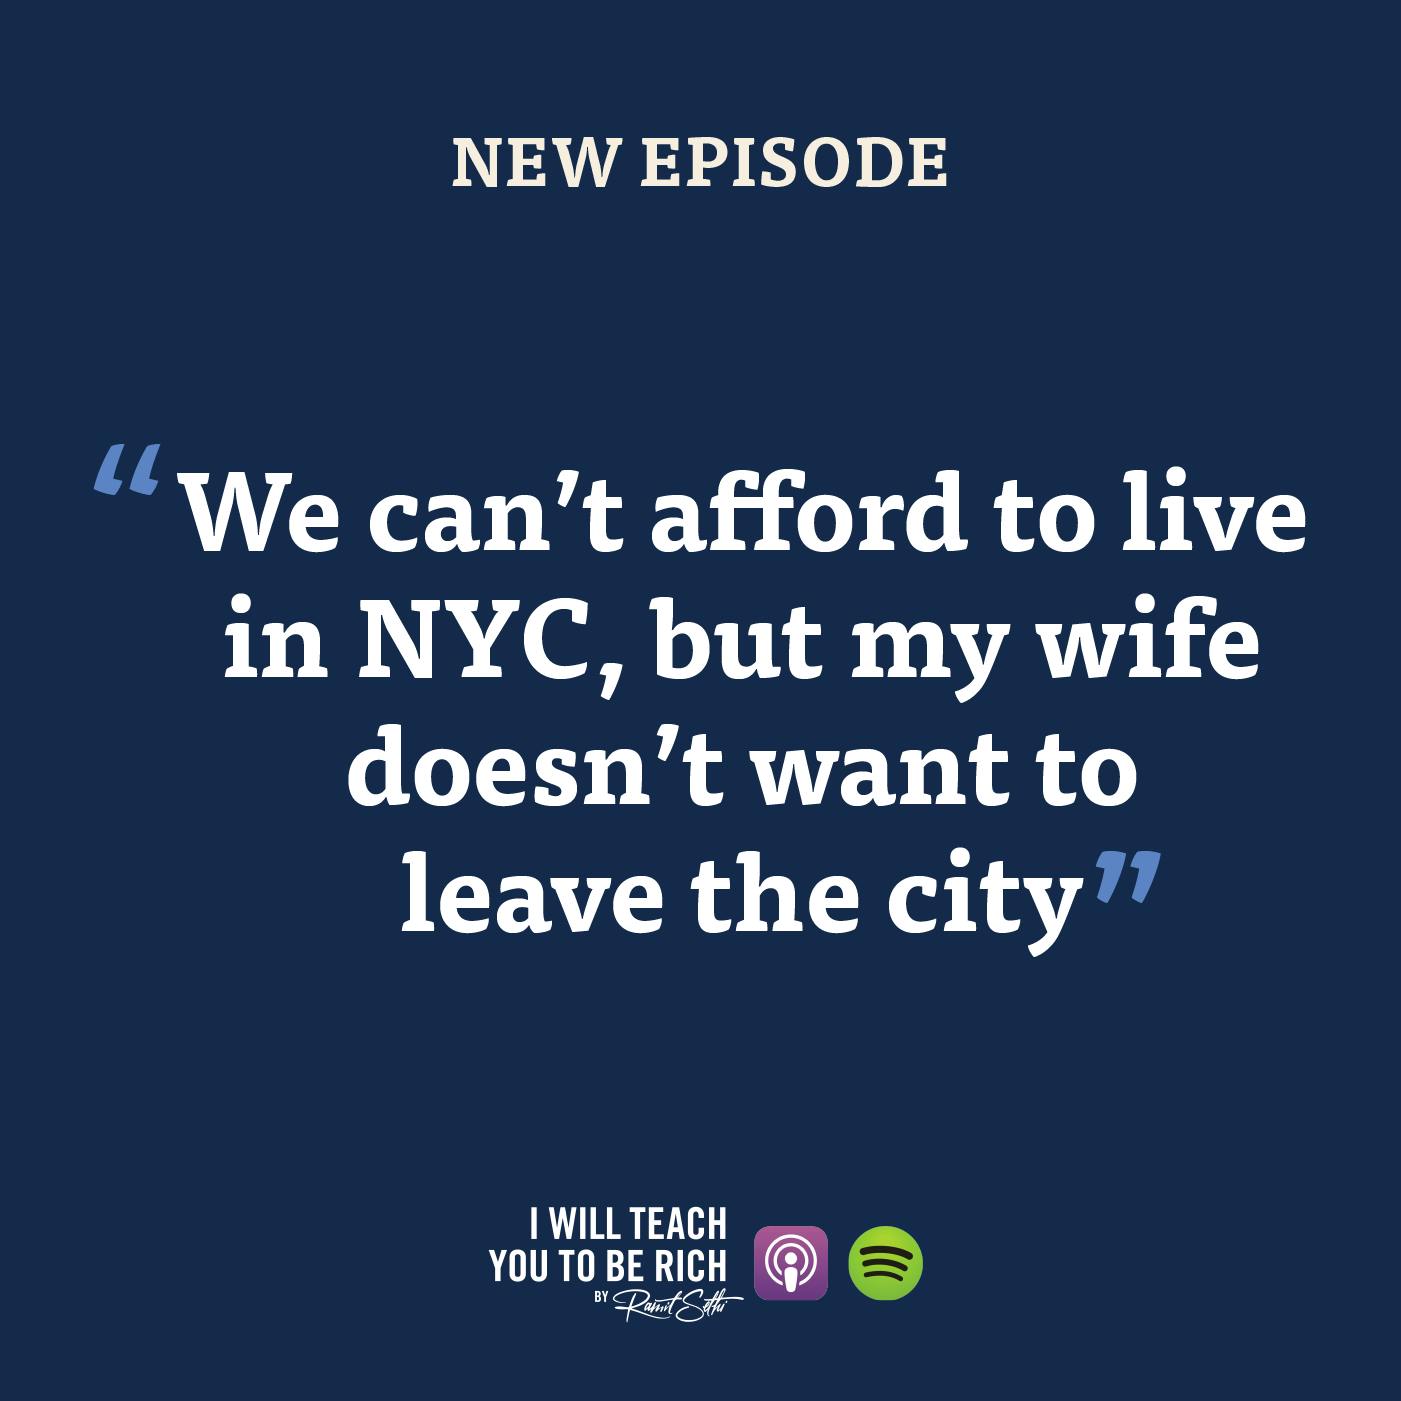 6. “We can’t afford to live in NYC, but my wife doesn’t want to leave the city”